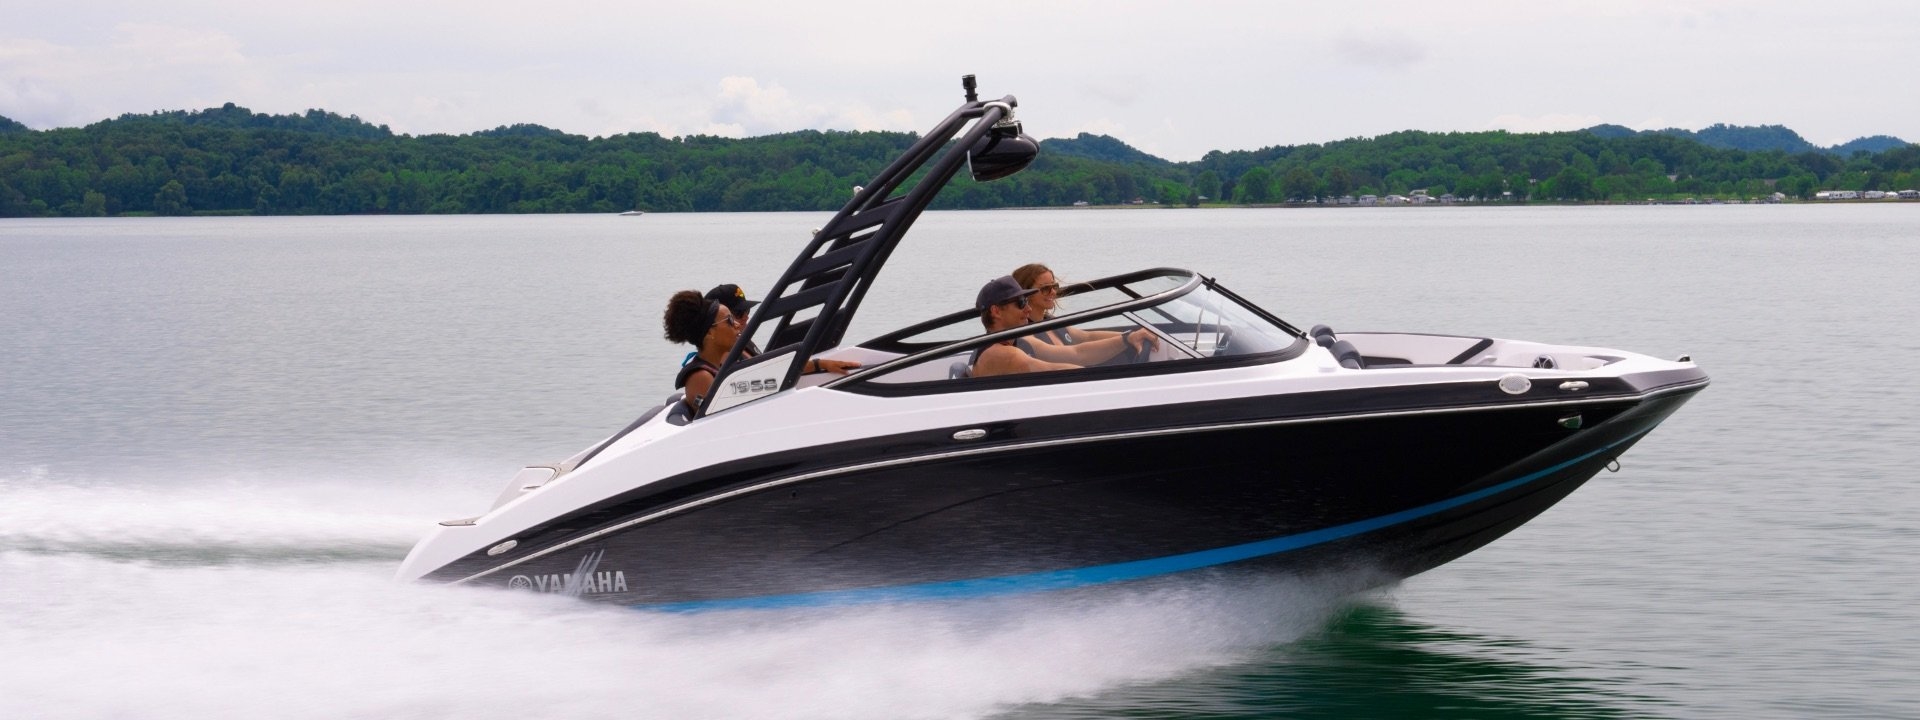 Yamaha 195S: Prices, Specs, Reviews and Sales Information - itBoat